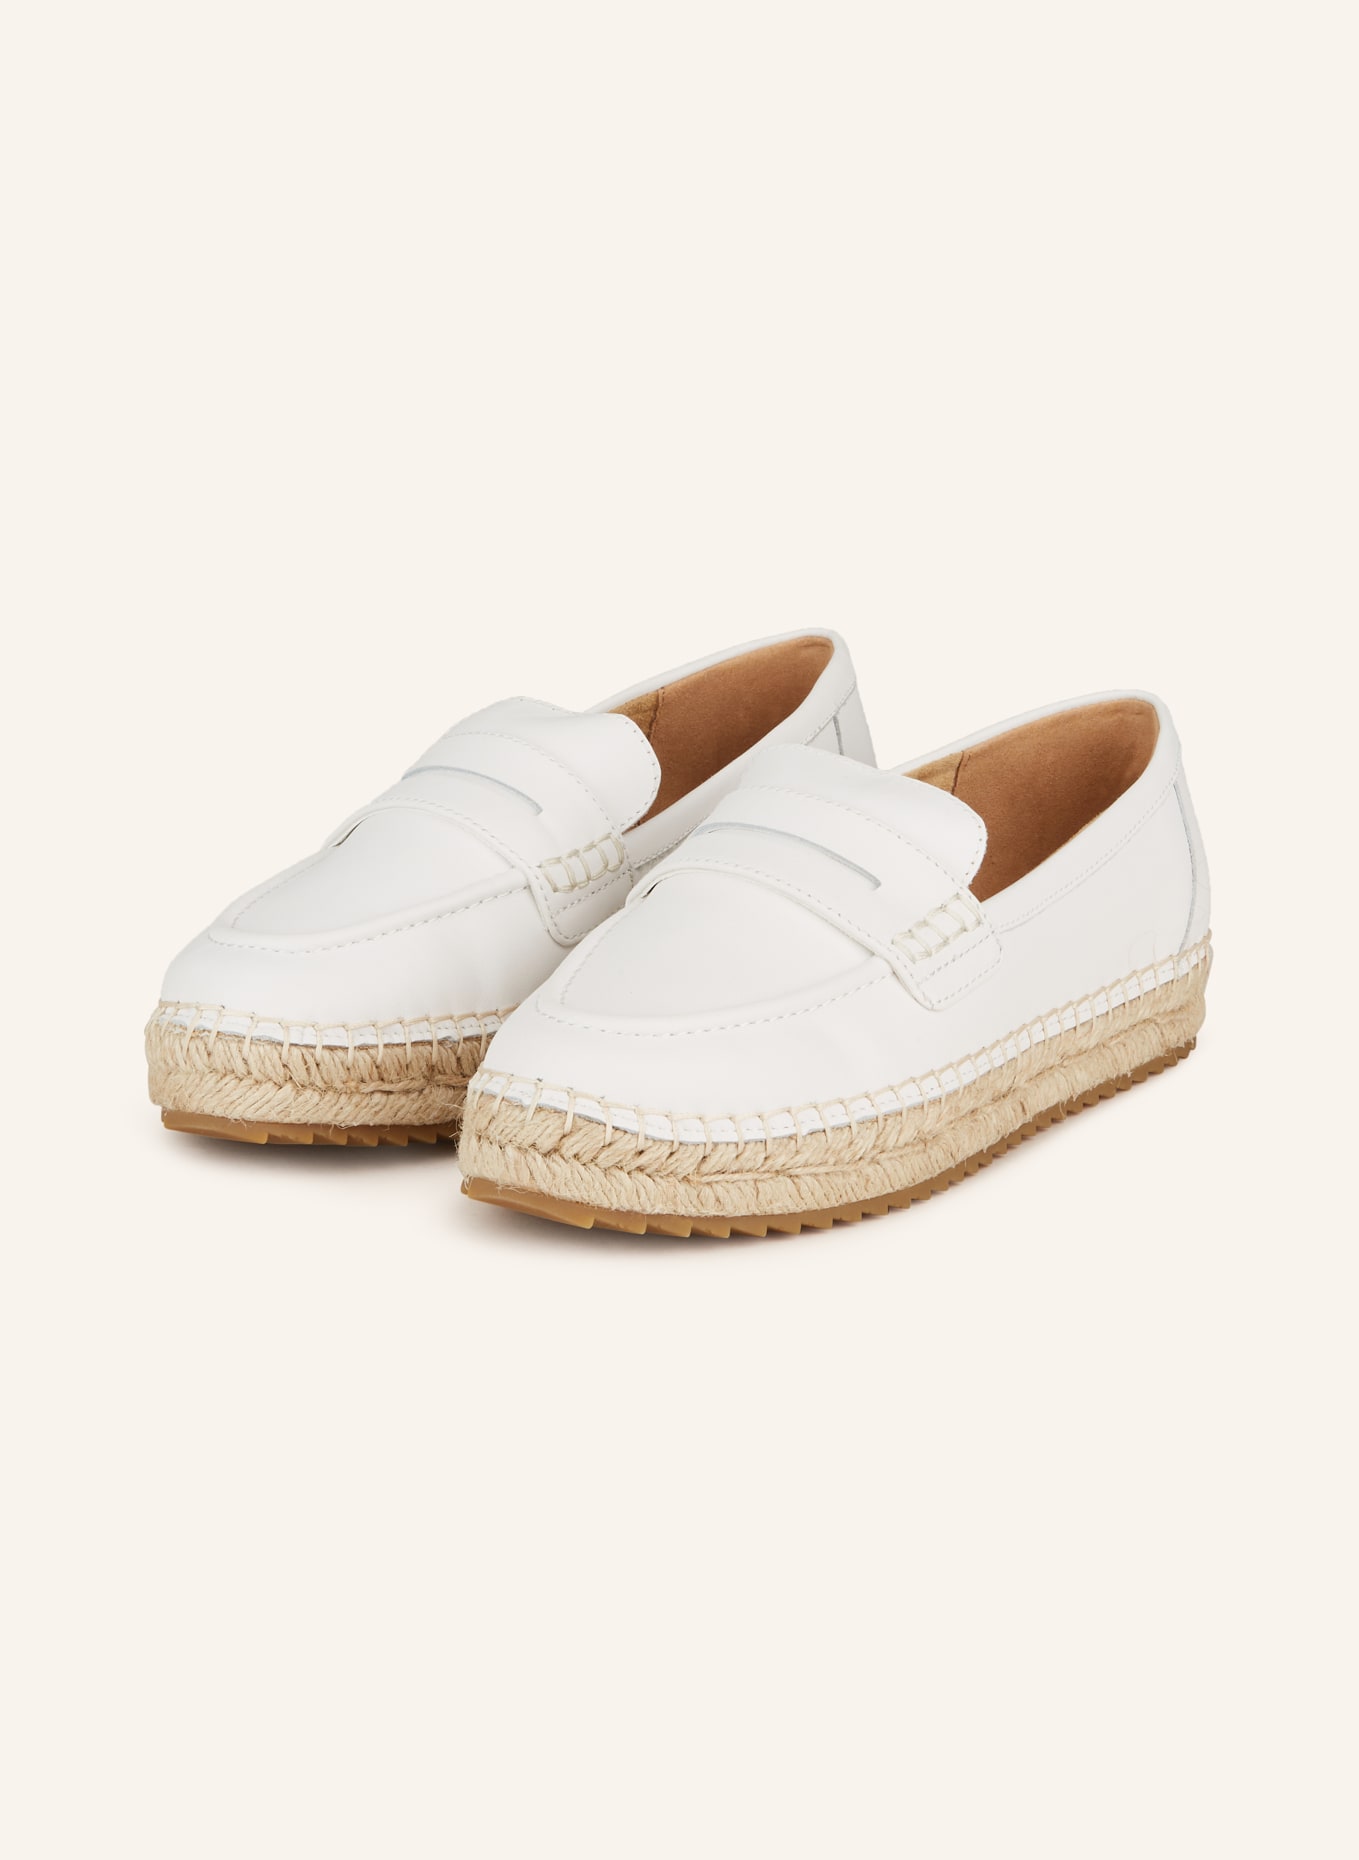 Marc O'Polo Penny-Loafer, Farbe: WEISS (Bild 1)